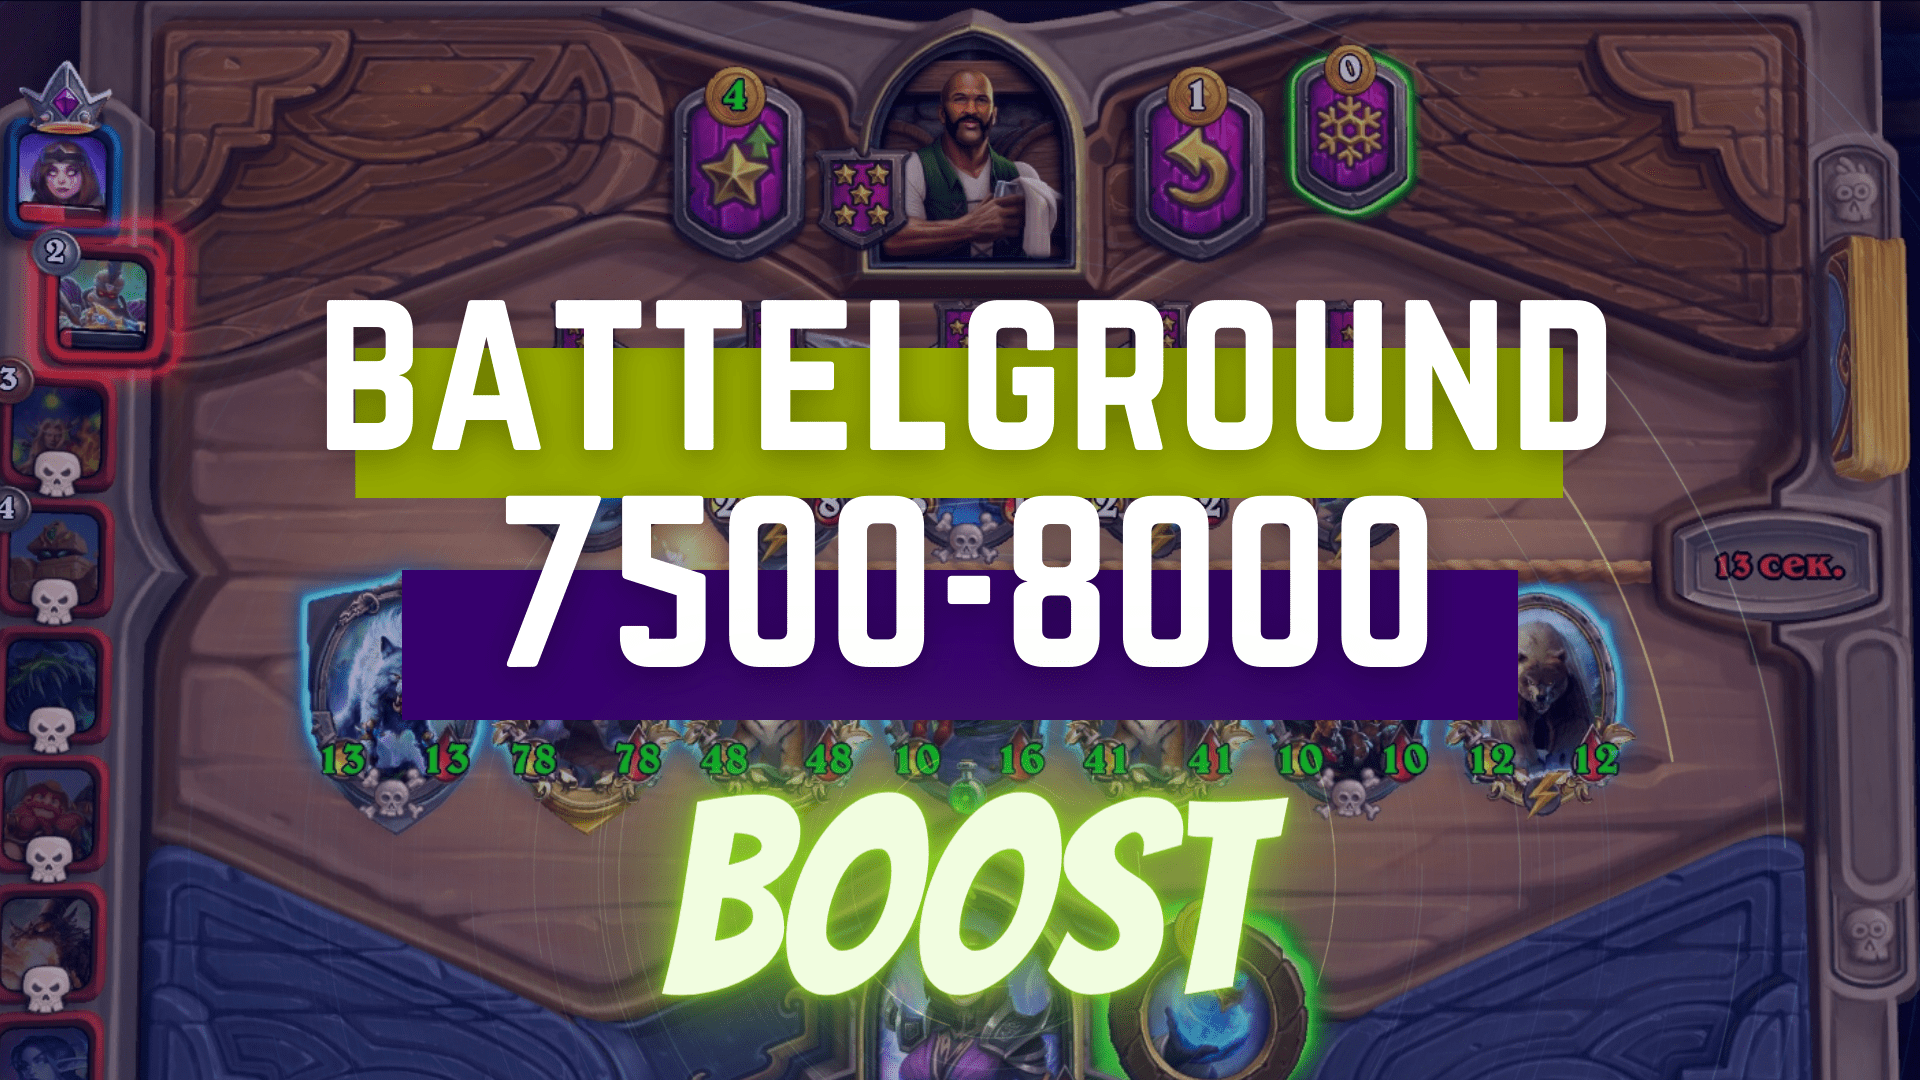 [BATTLEGROUNDS RATING] BOOST FROM 7500 TO 8000 GBD - e2p.com